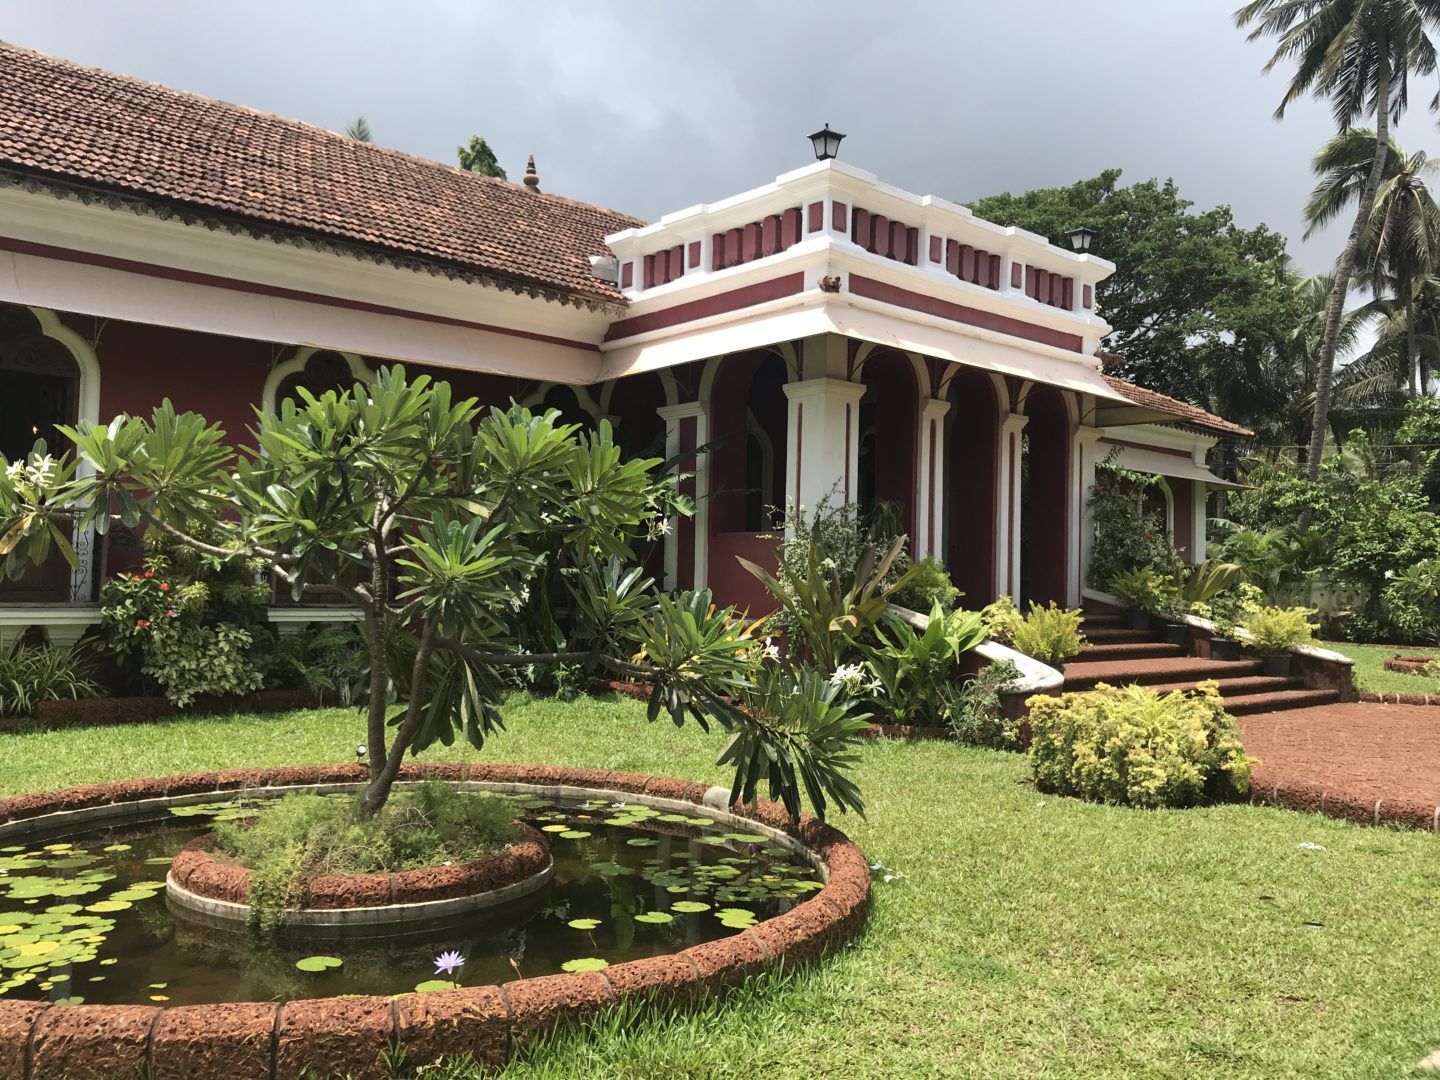 Lunch at this 100-year old Goan Villa by the Lake – Amrapali House of Grace